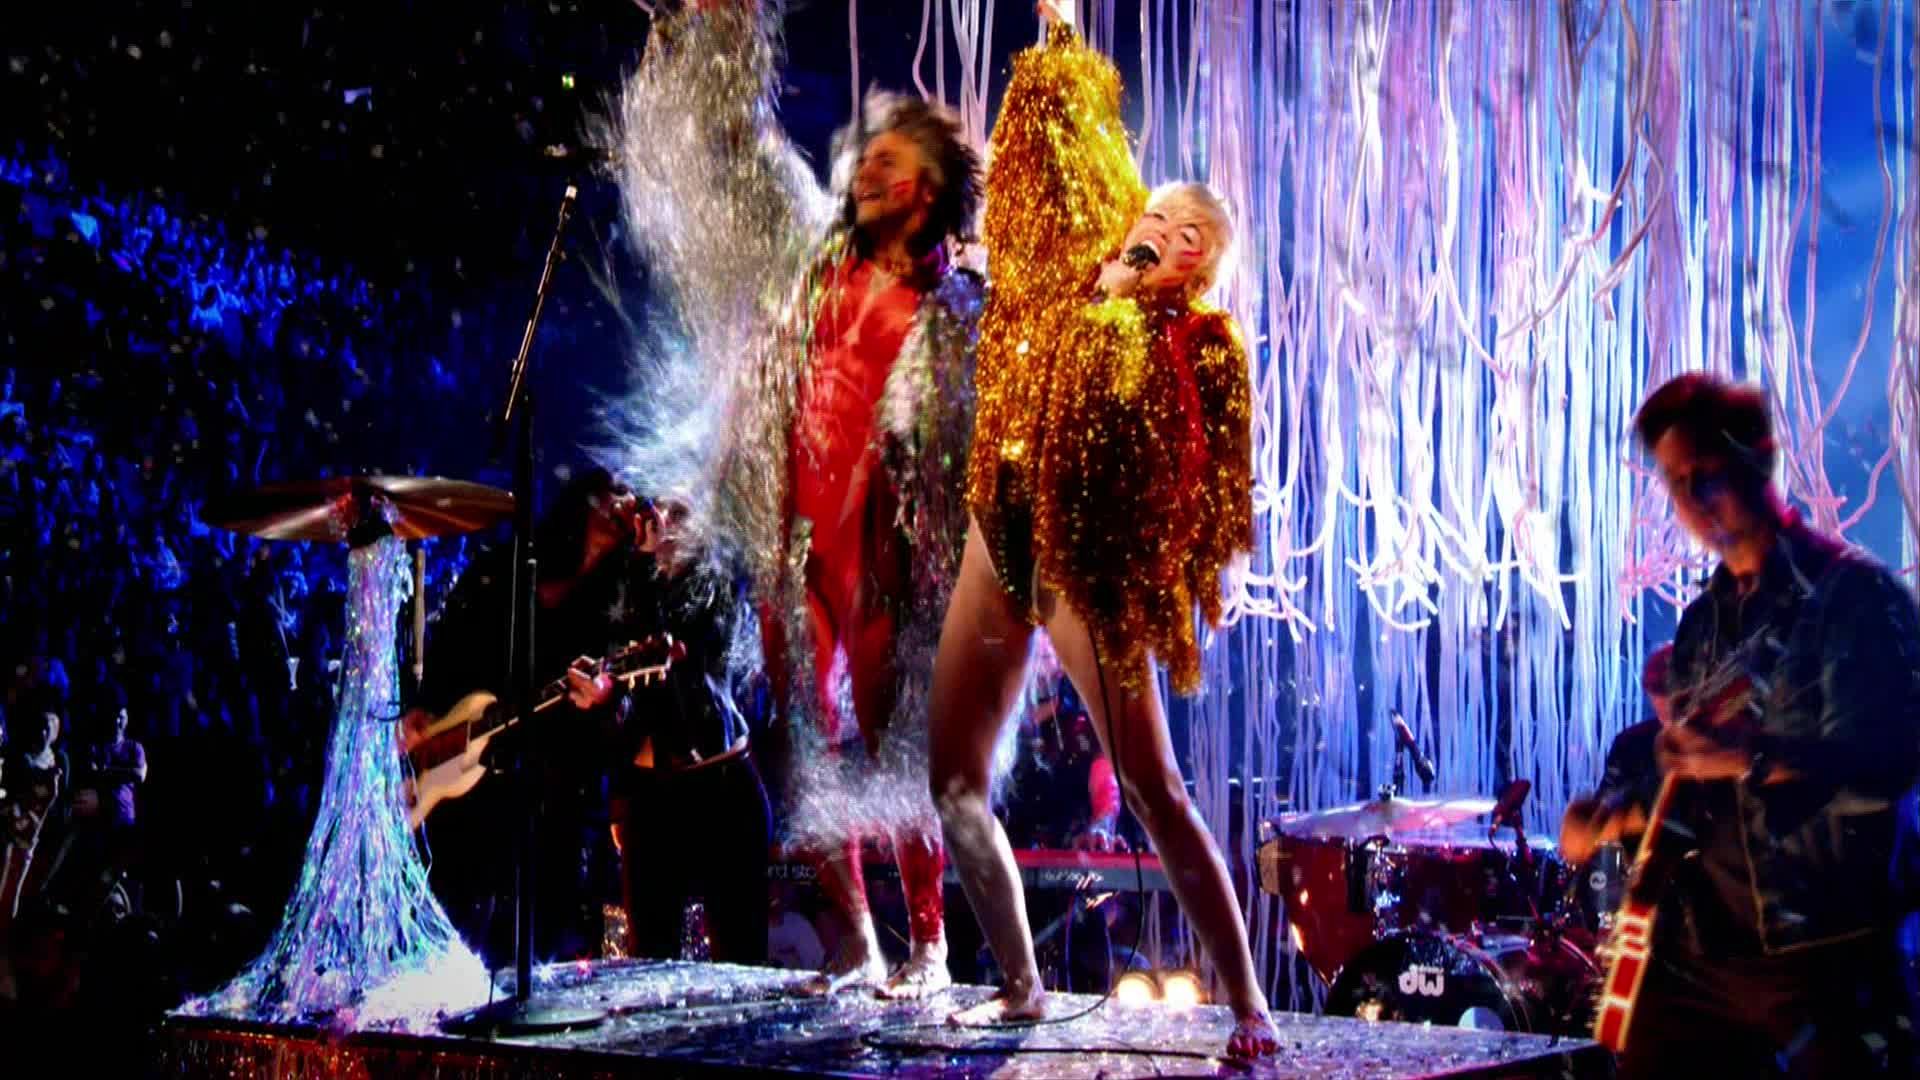 Miley Cyrus [ft The Flaming Lips] - 2014-05-18, Billboard Music Awards - 1080 TS - LSD preview 20